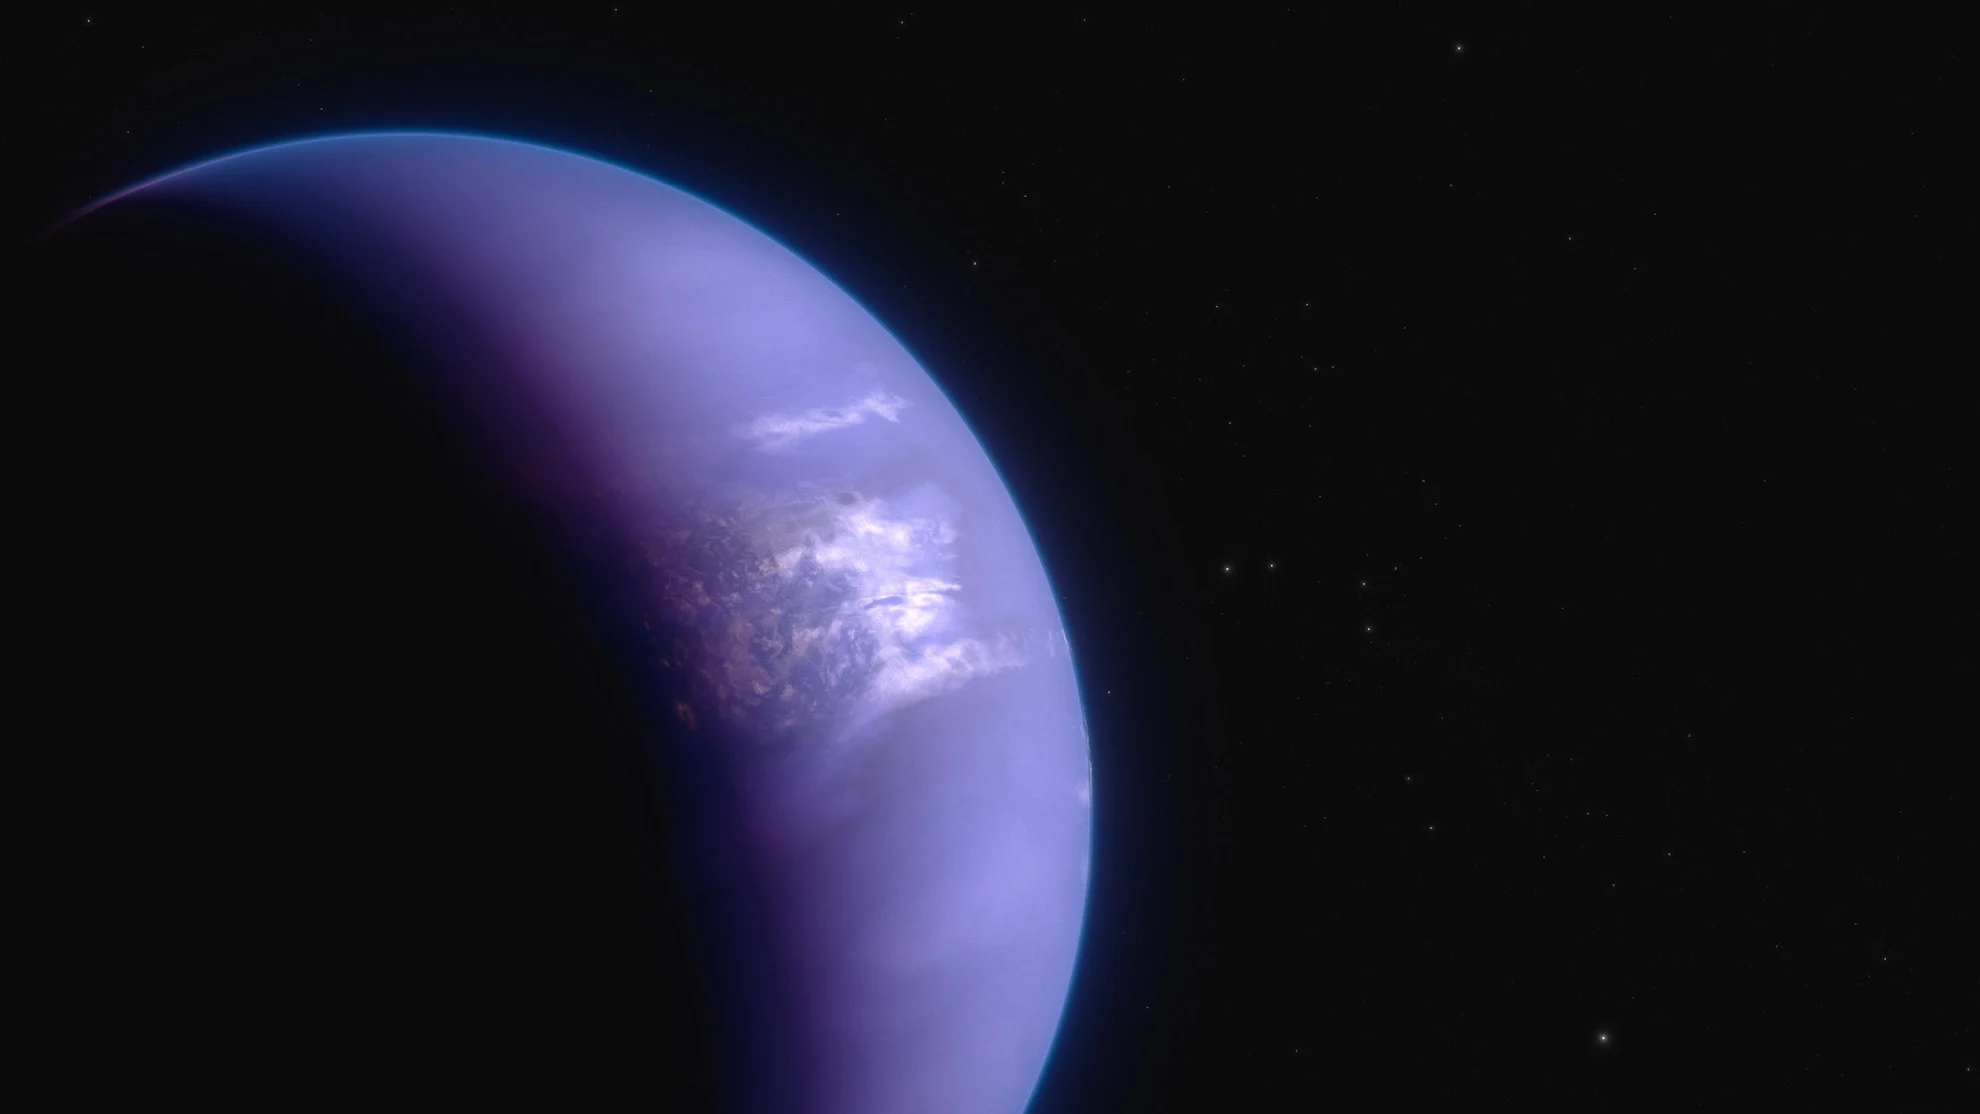 Astronomers map 8,000 kph winds on a giant alien exoplanet